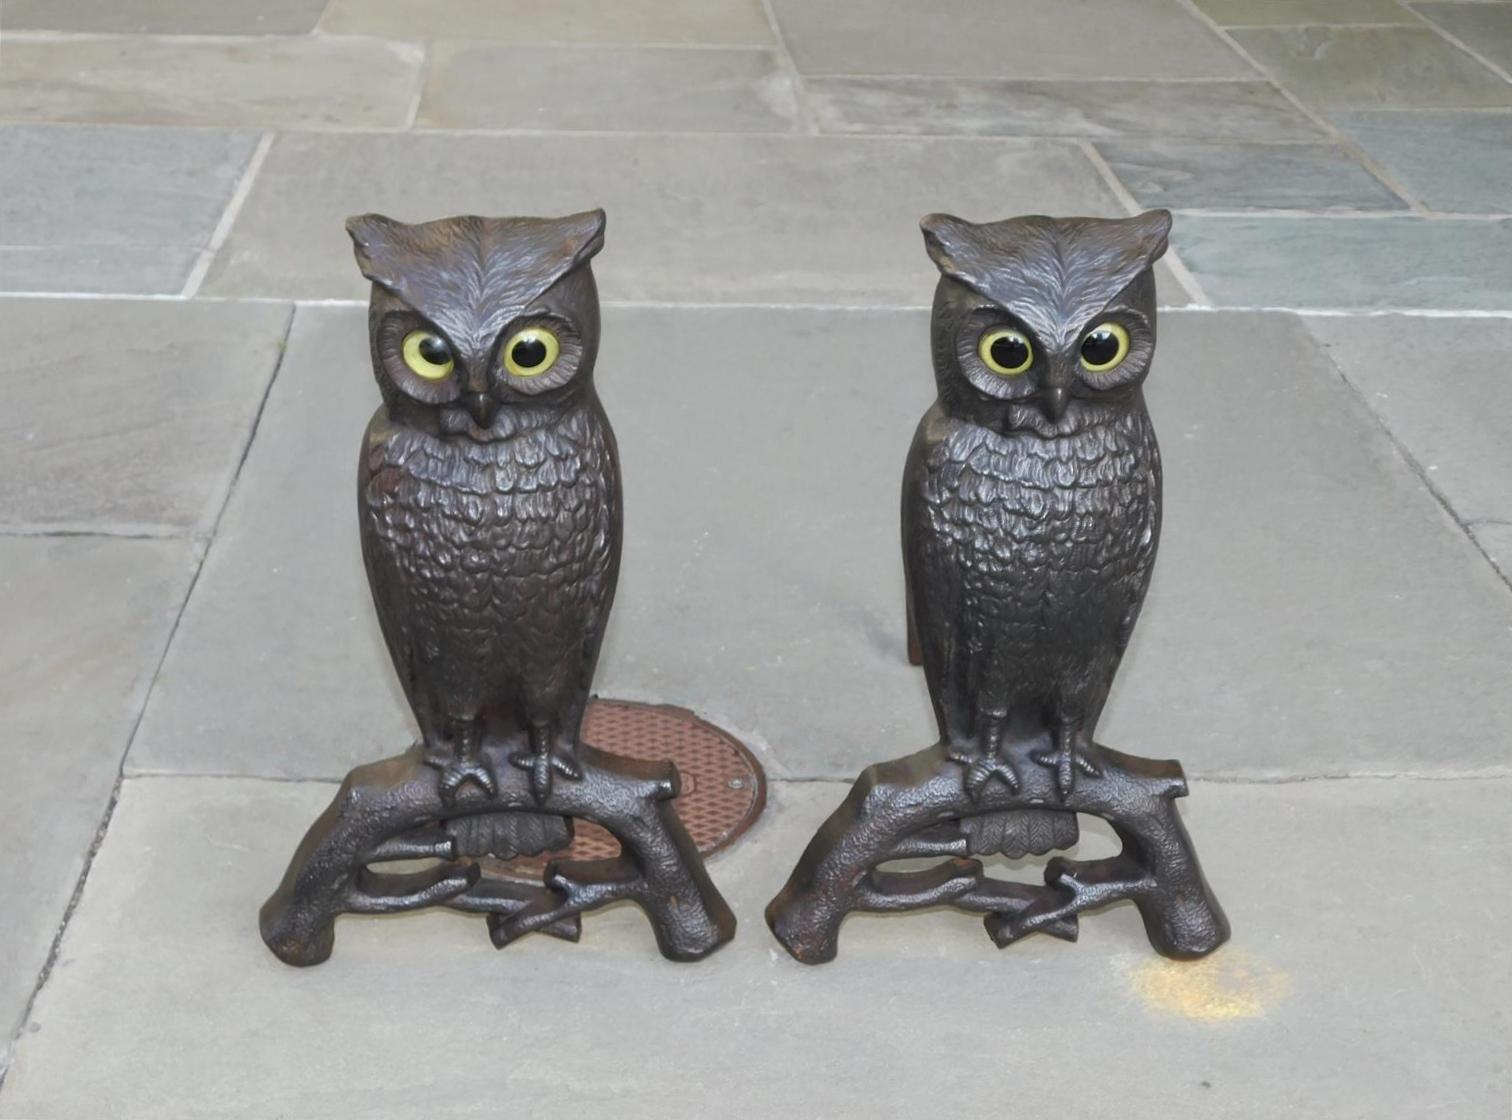 Pair of American cast iron owl andirons with the original glass colored eyes perched on scrolled branches. Boston, MA late 19th century.